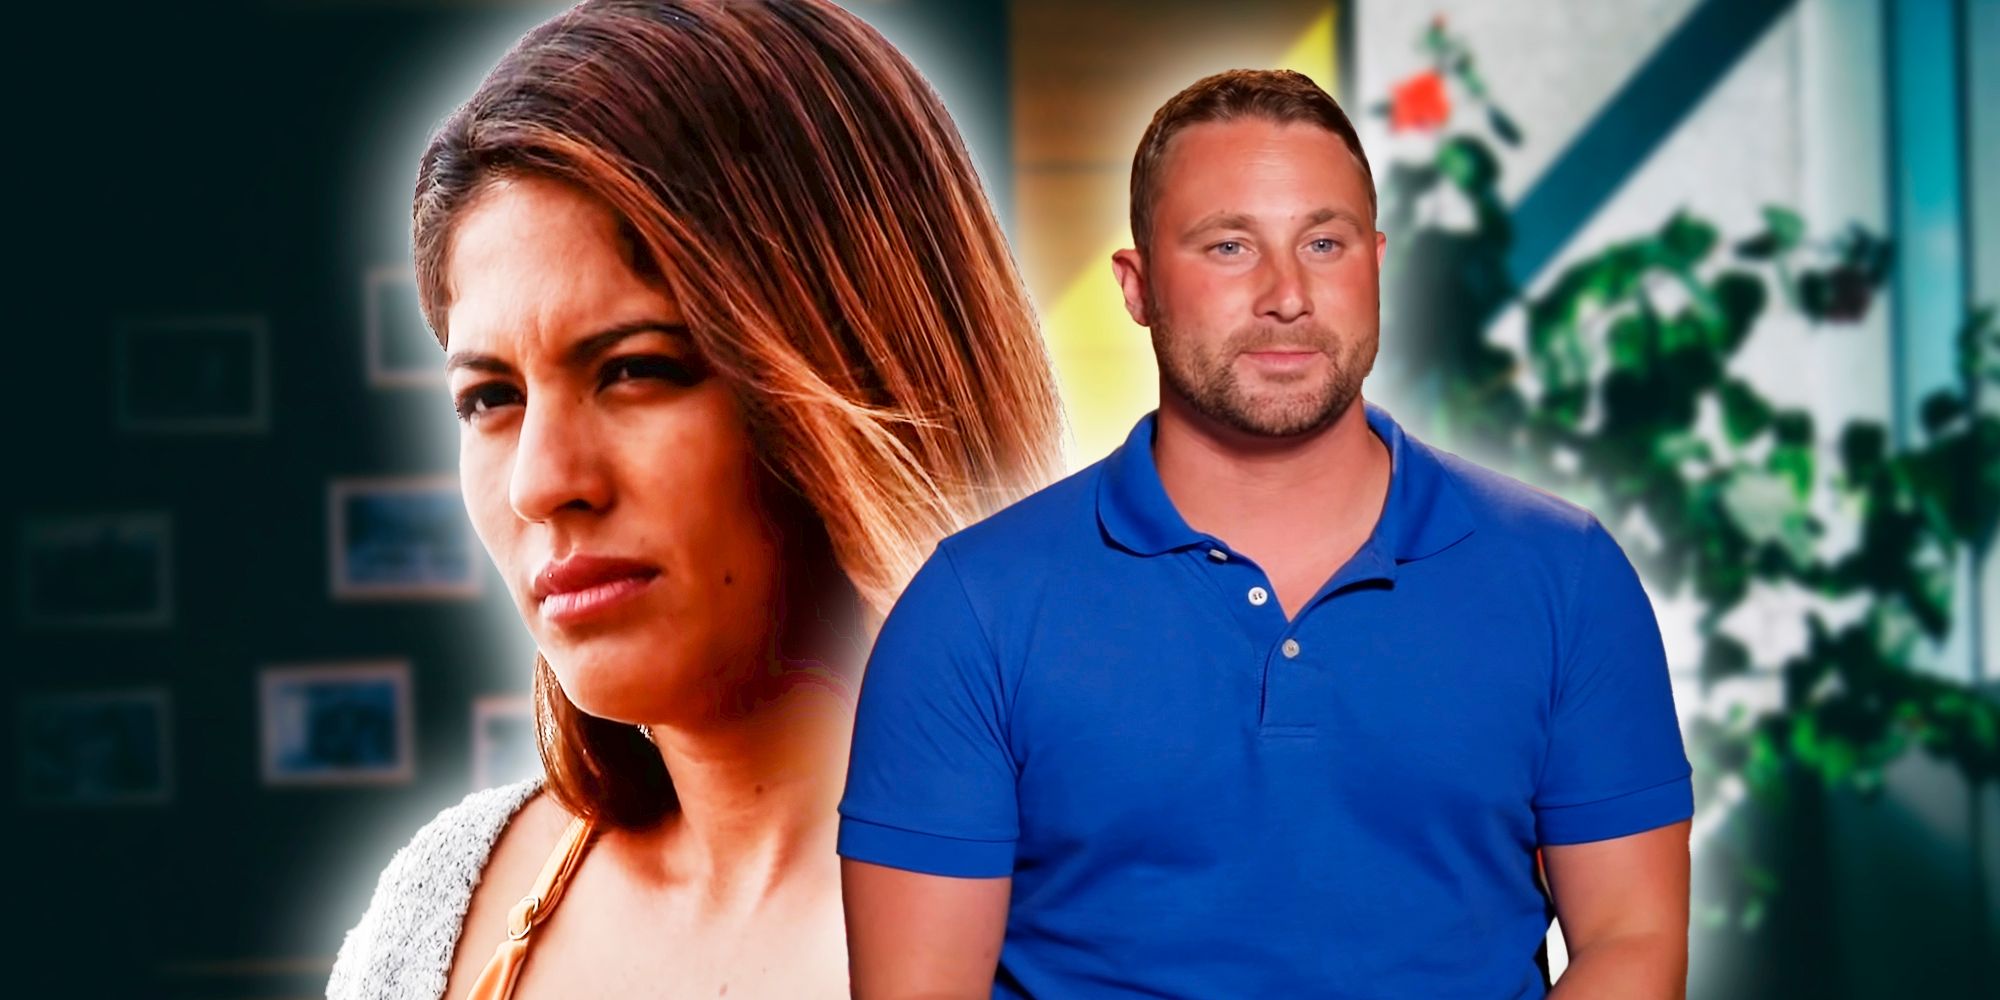 90 Day Fiance's Evelin Villegas & Corey Rathgeber looking serious